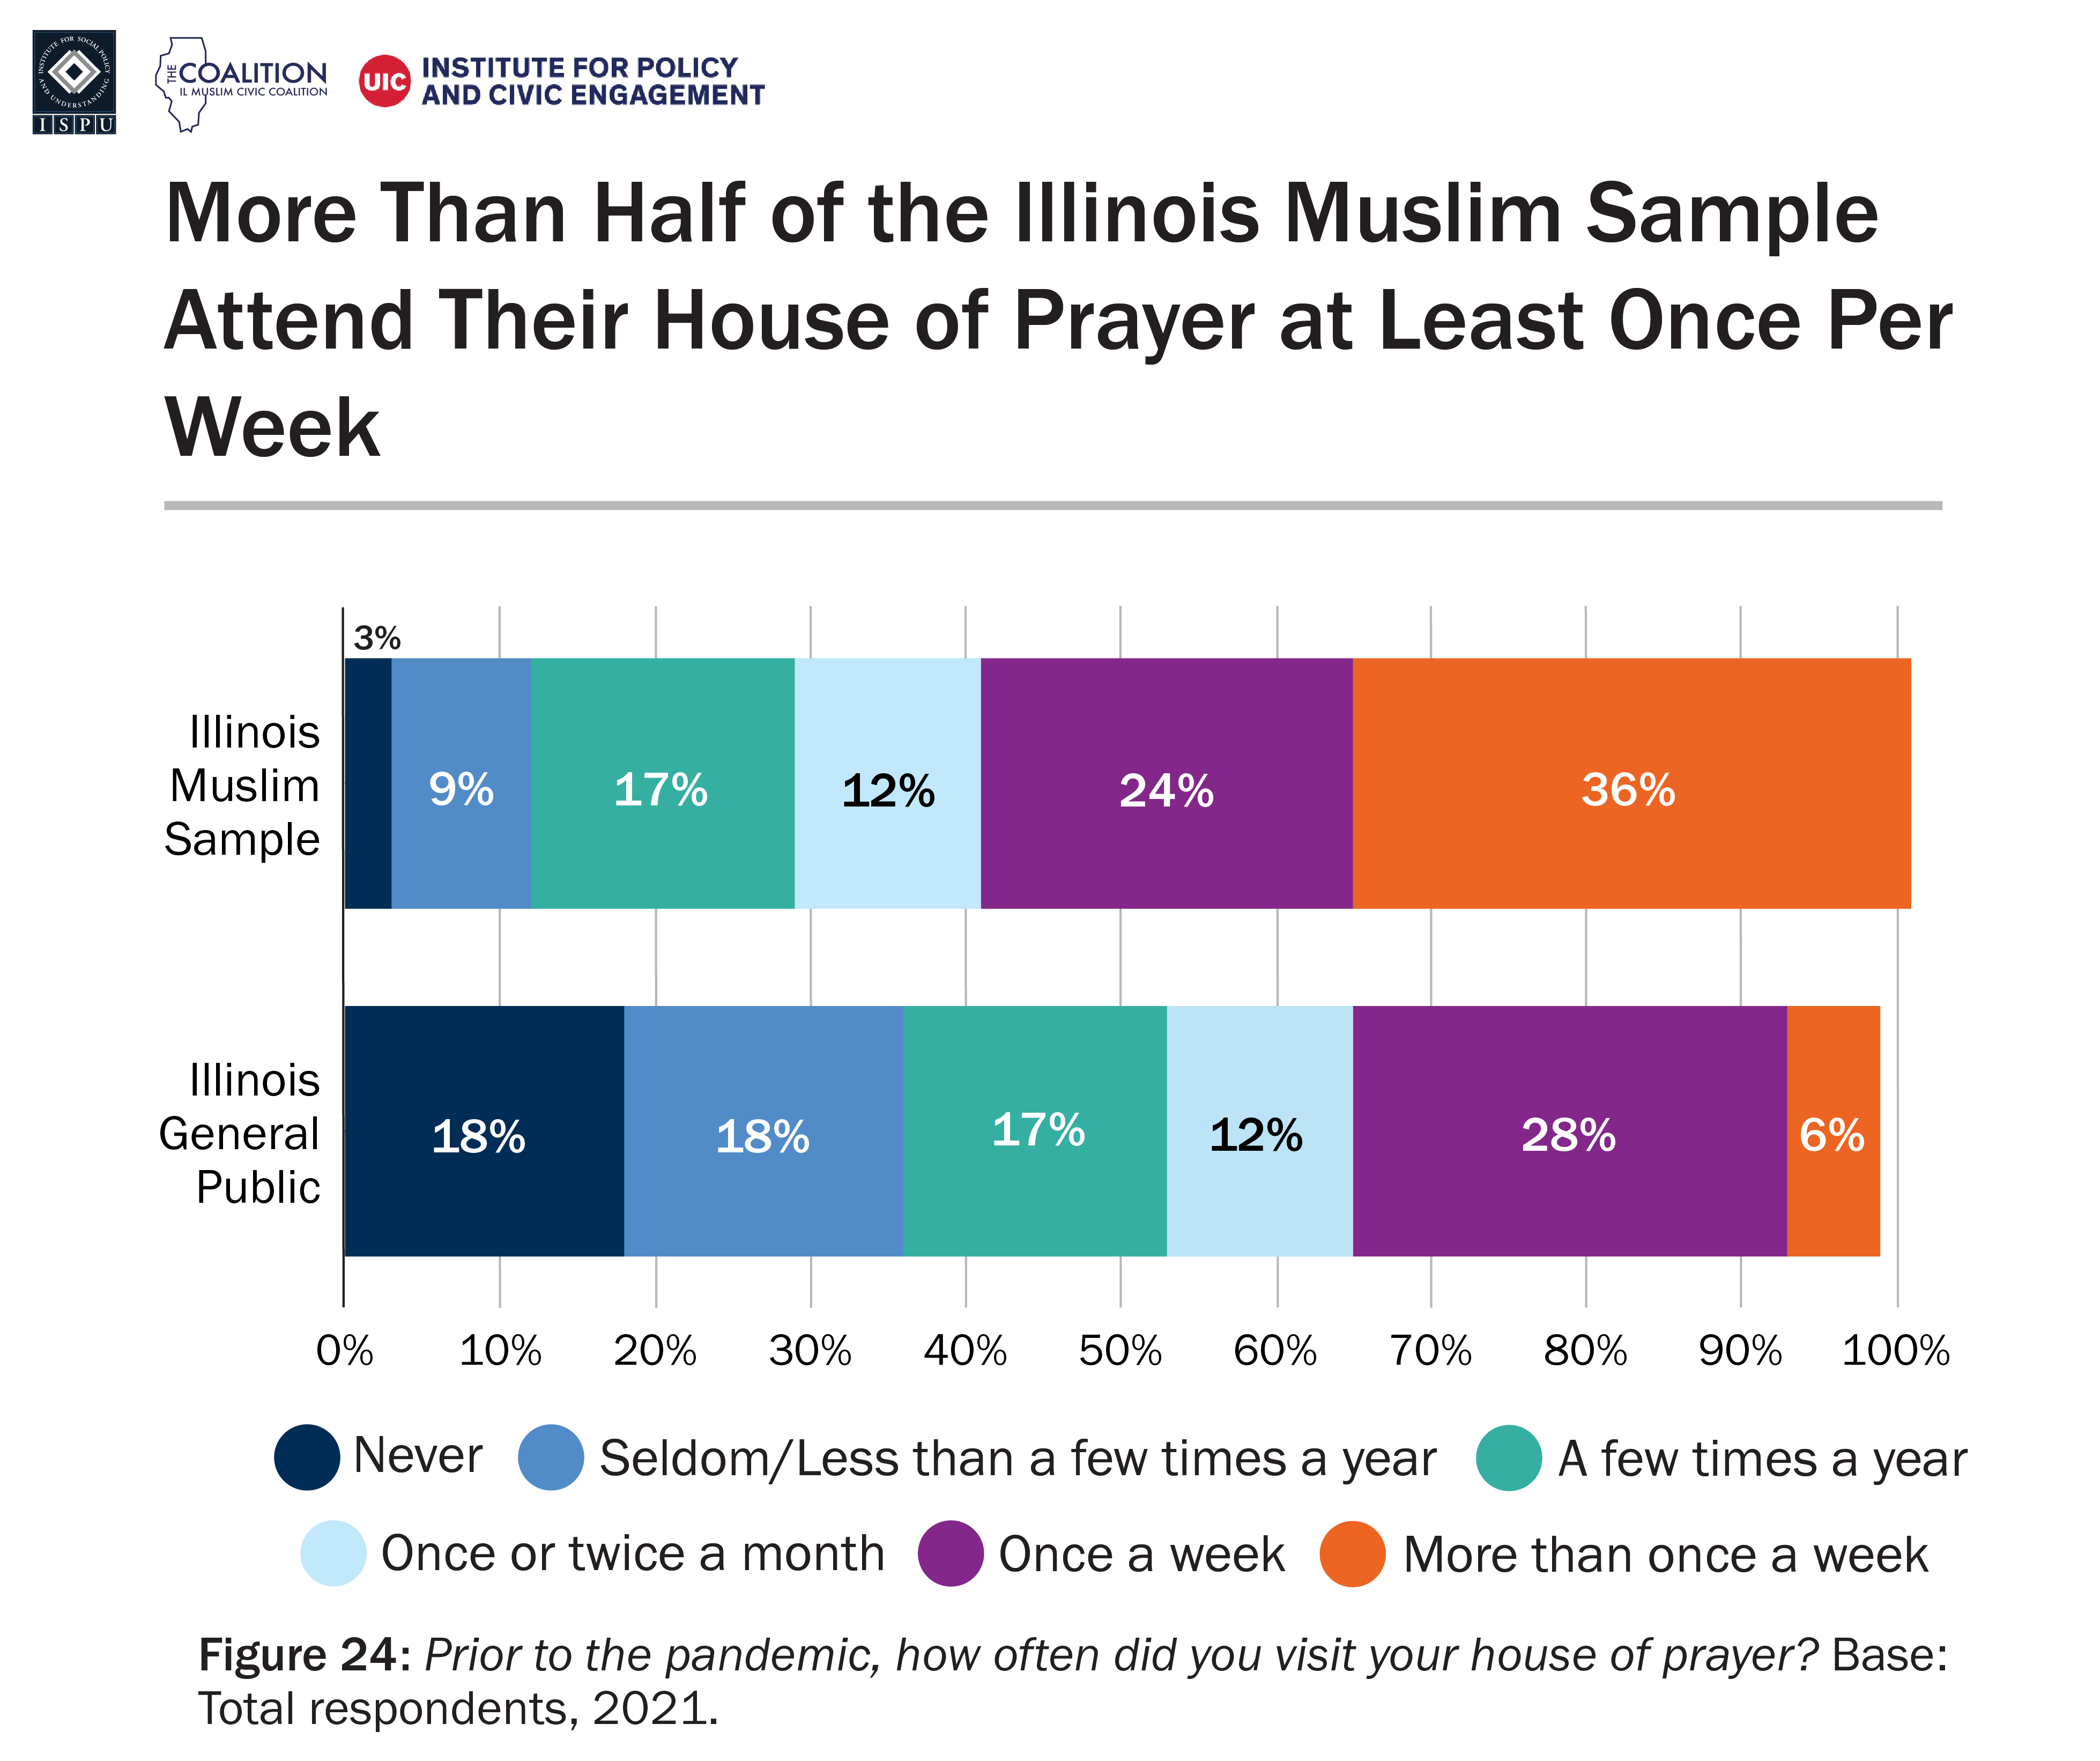 A bar graph showing frequency of attendance at house of prayer among the Illinois Muslim sample and Illinois general public